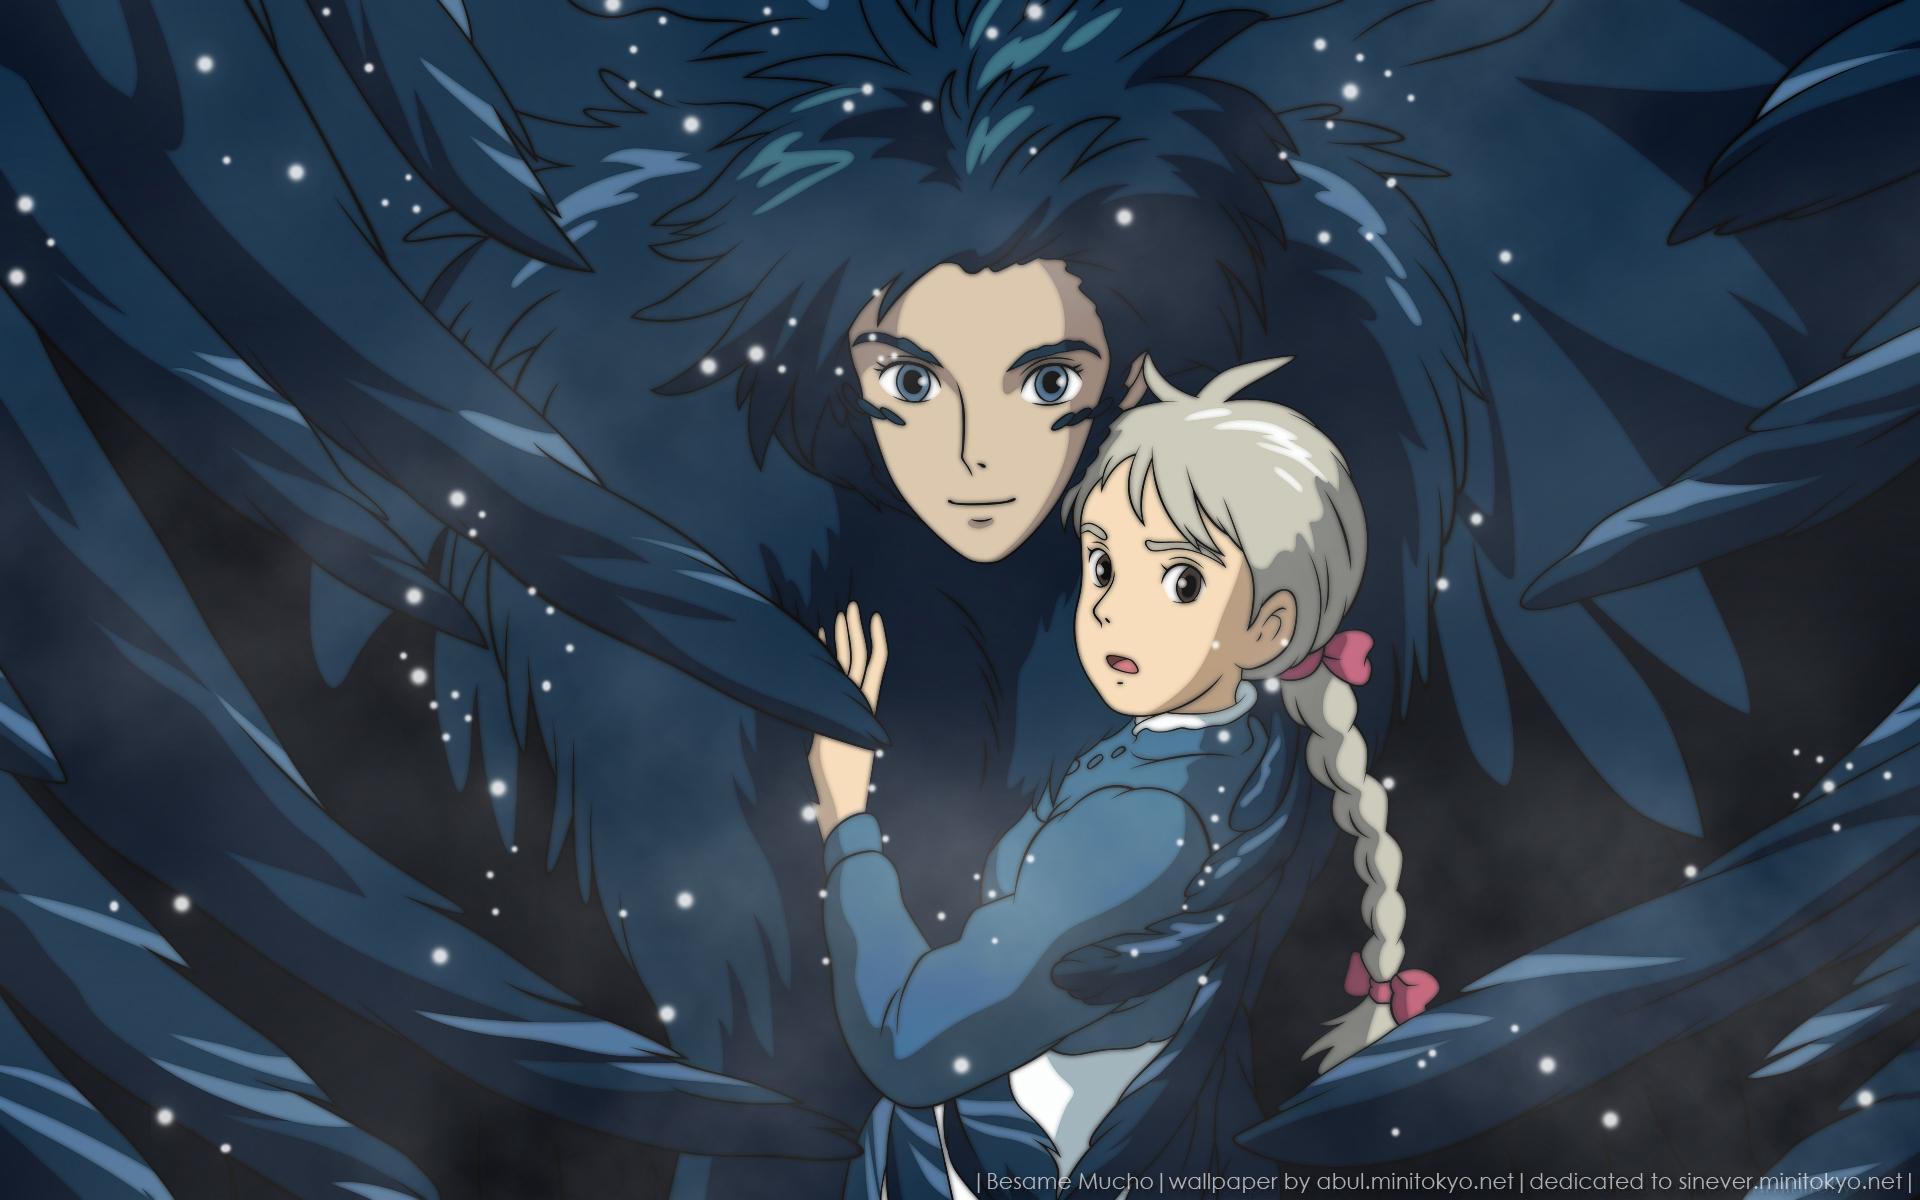 Anime Howls Moving Castle Wallpapers Top Free Anime Howls Moving Castle Backgrounds 4031